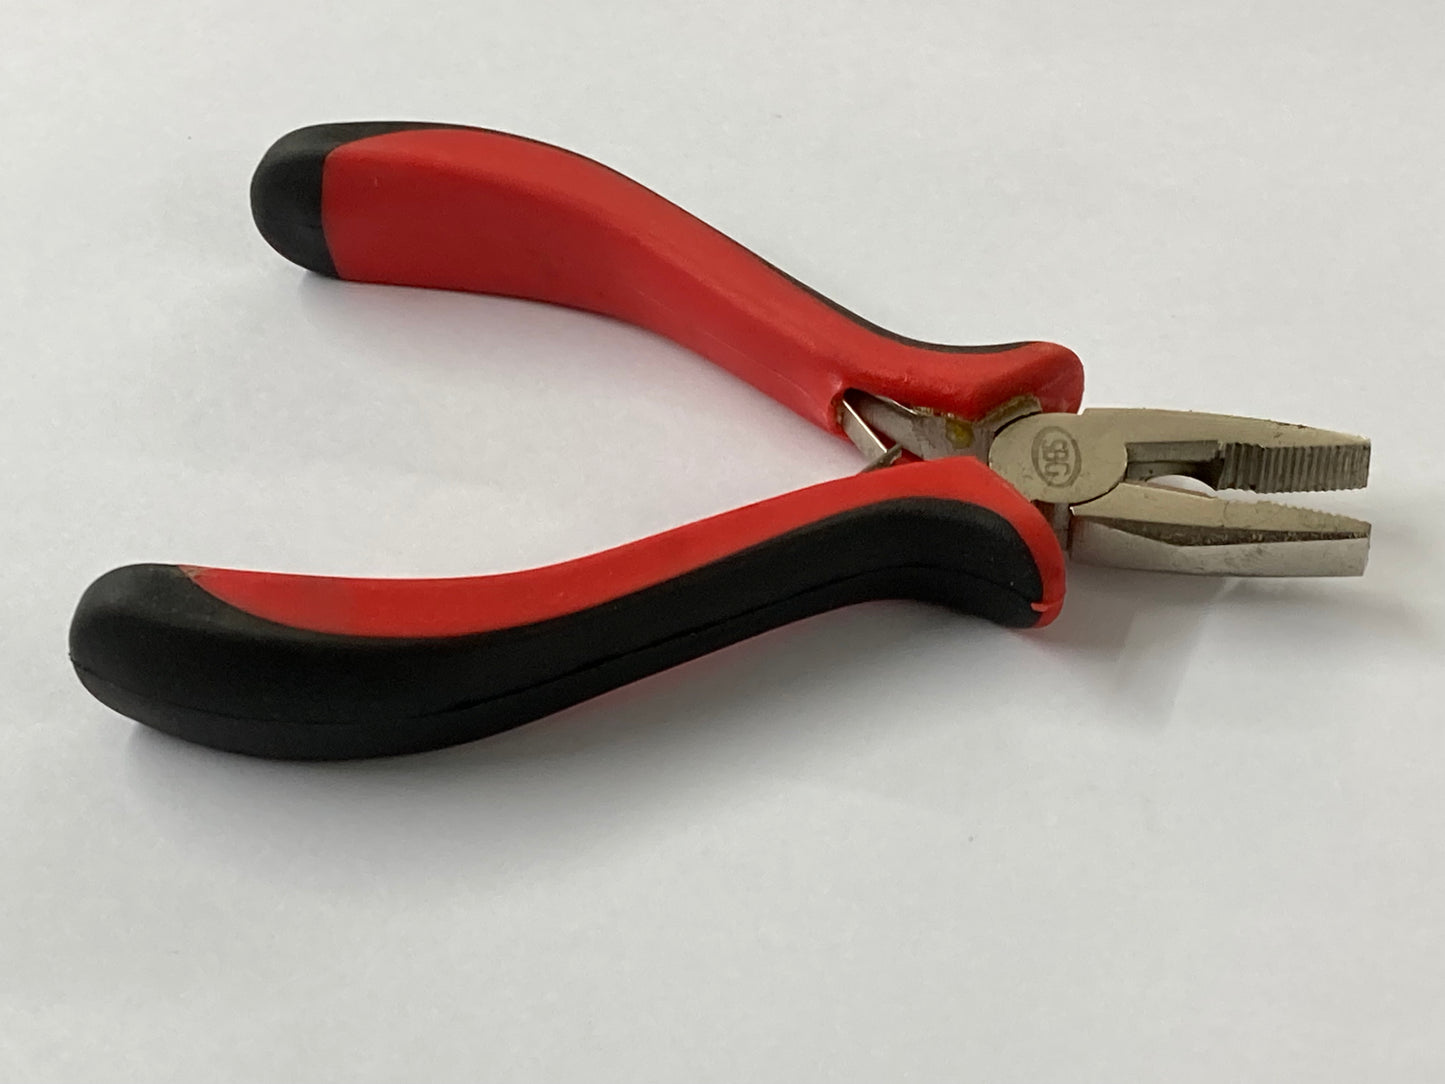 526 - Mounting Pliers